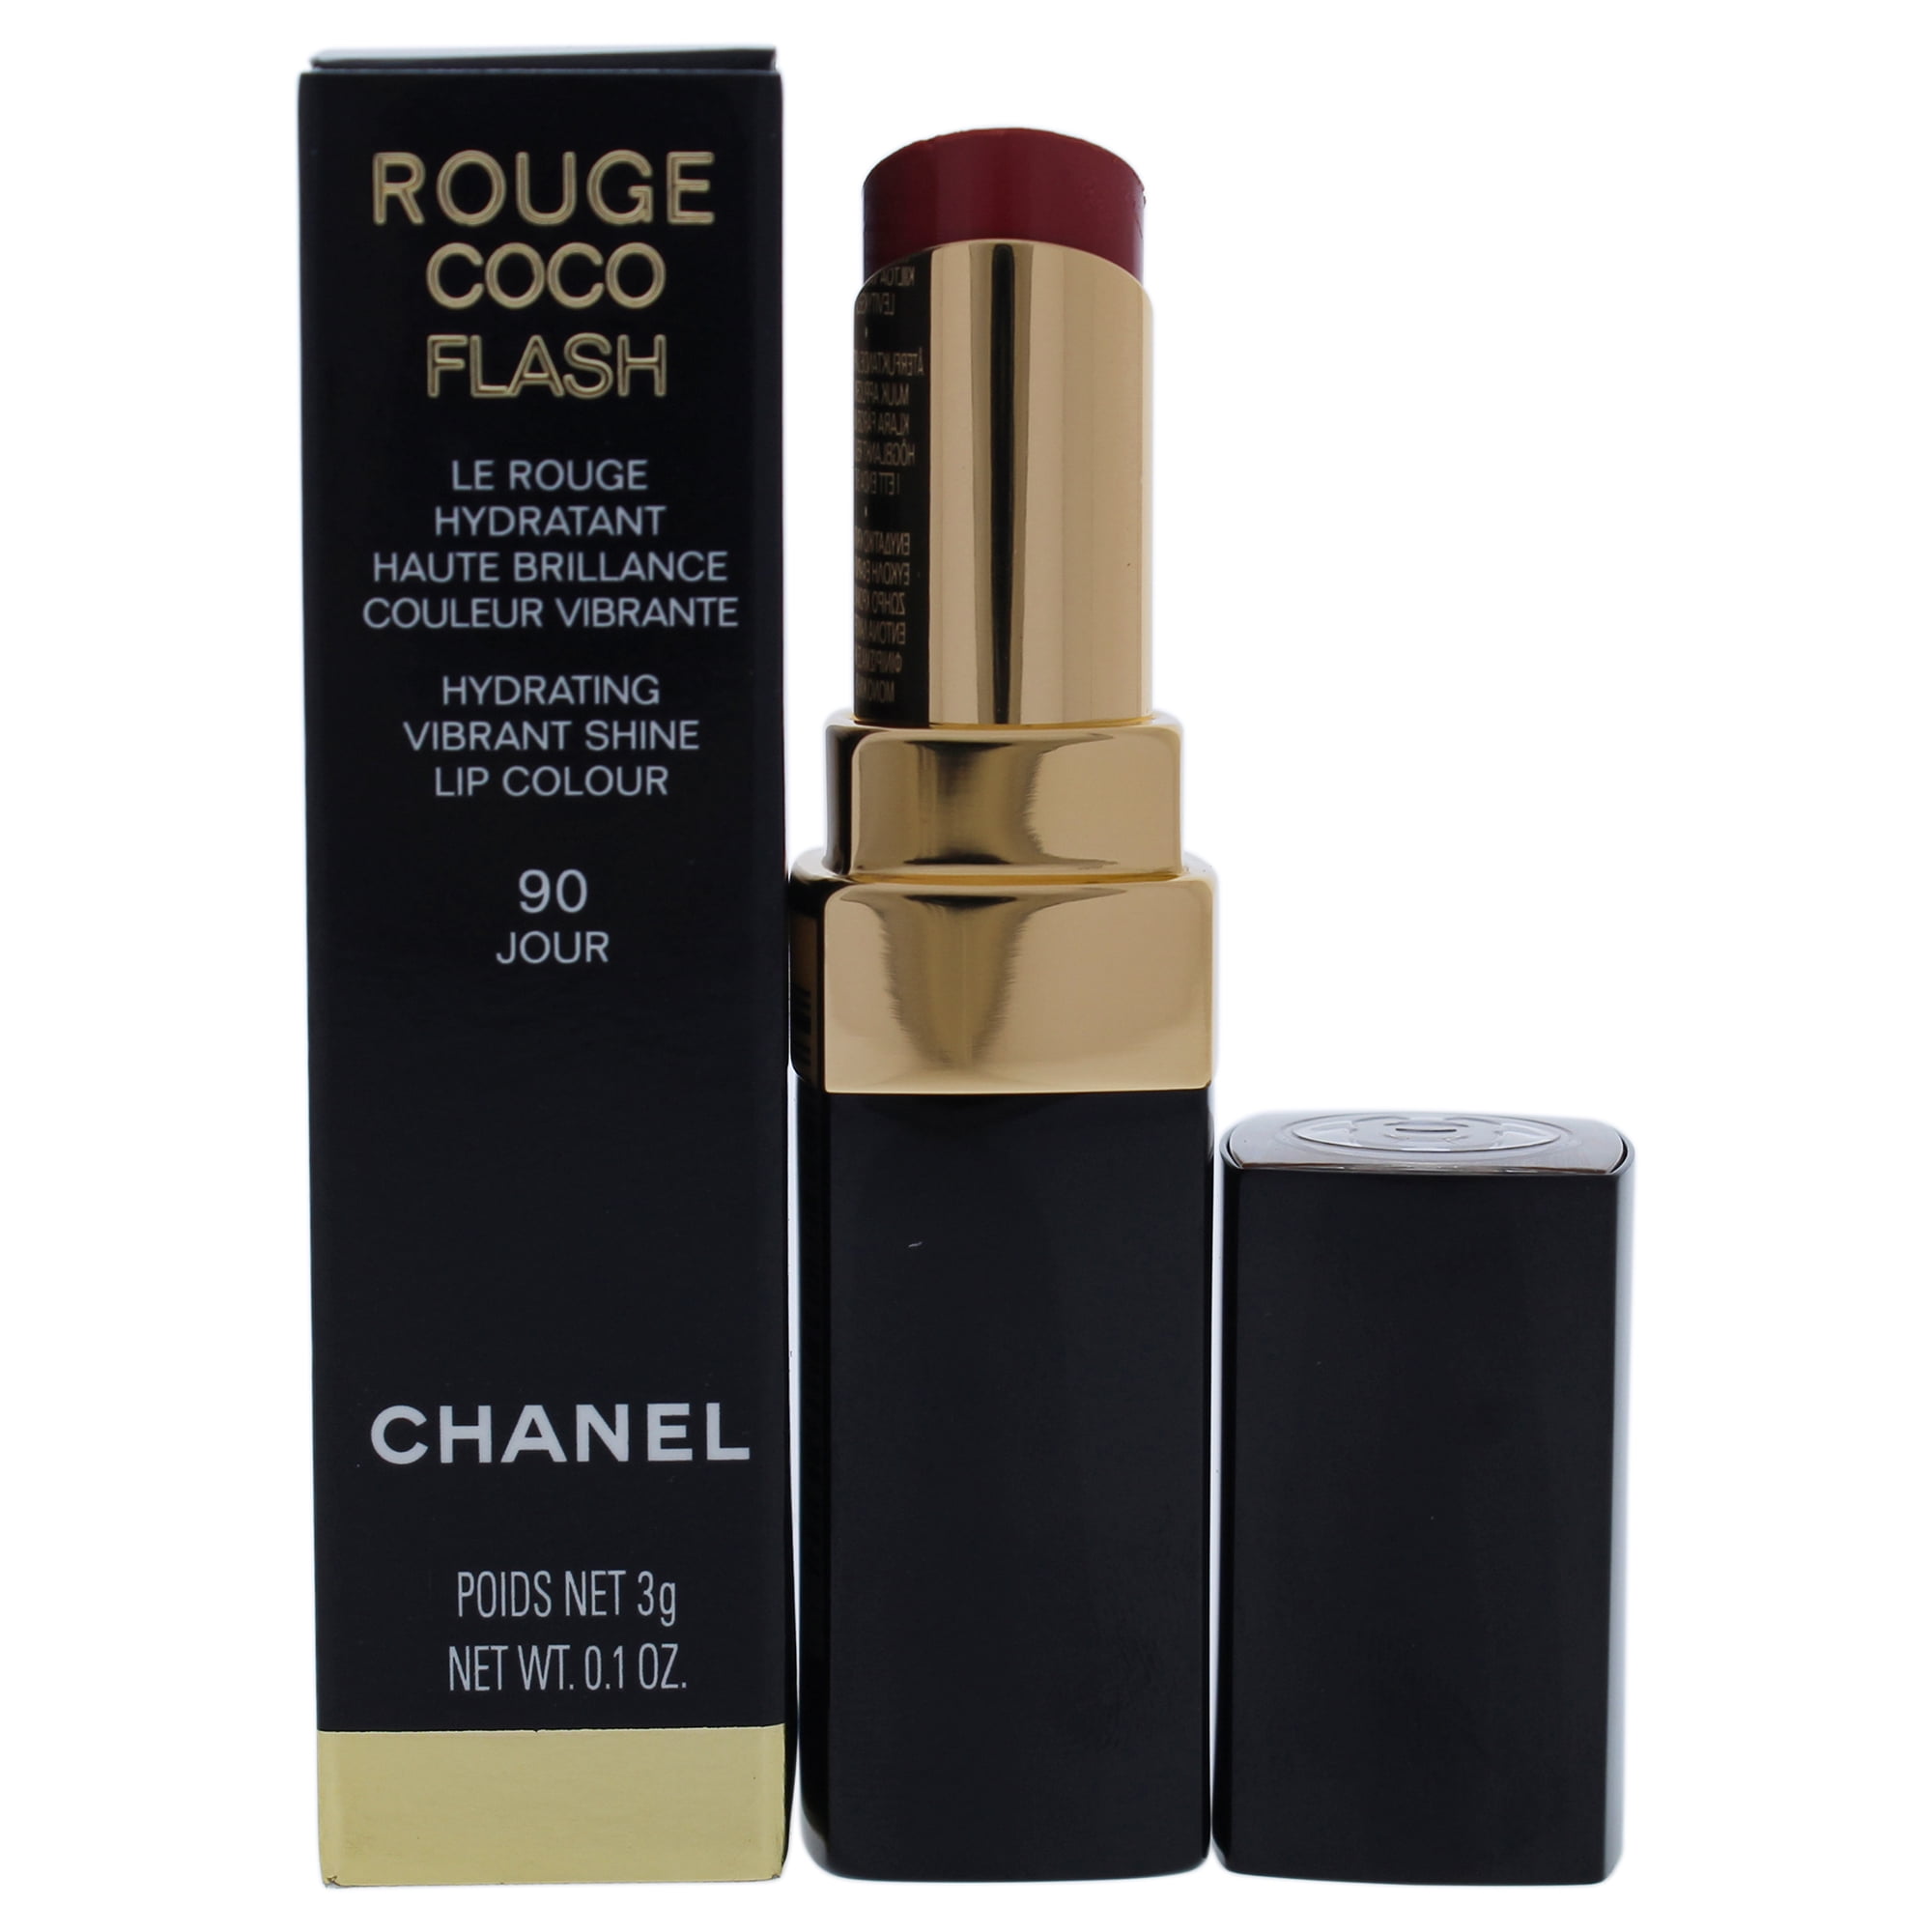 90 MUTINE CHANEL ROUGE COCO SHINE  SWATCHES AND REVIEW  CHANEL VARIATION  LE ROUGE COLLECTION  Chanel rouge coco shine Chanel lipstick Chanel  makeup